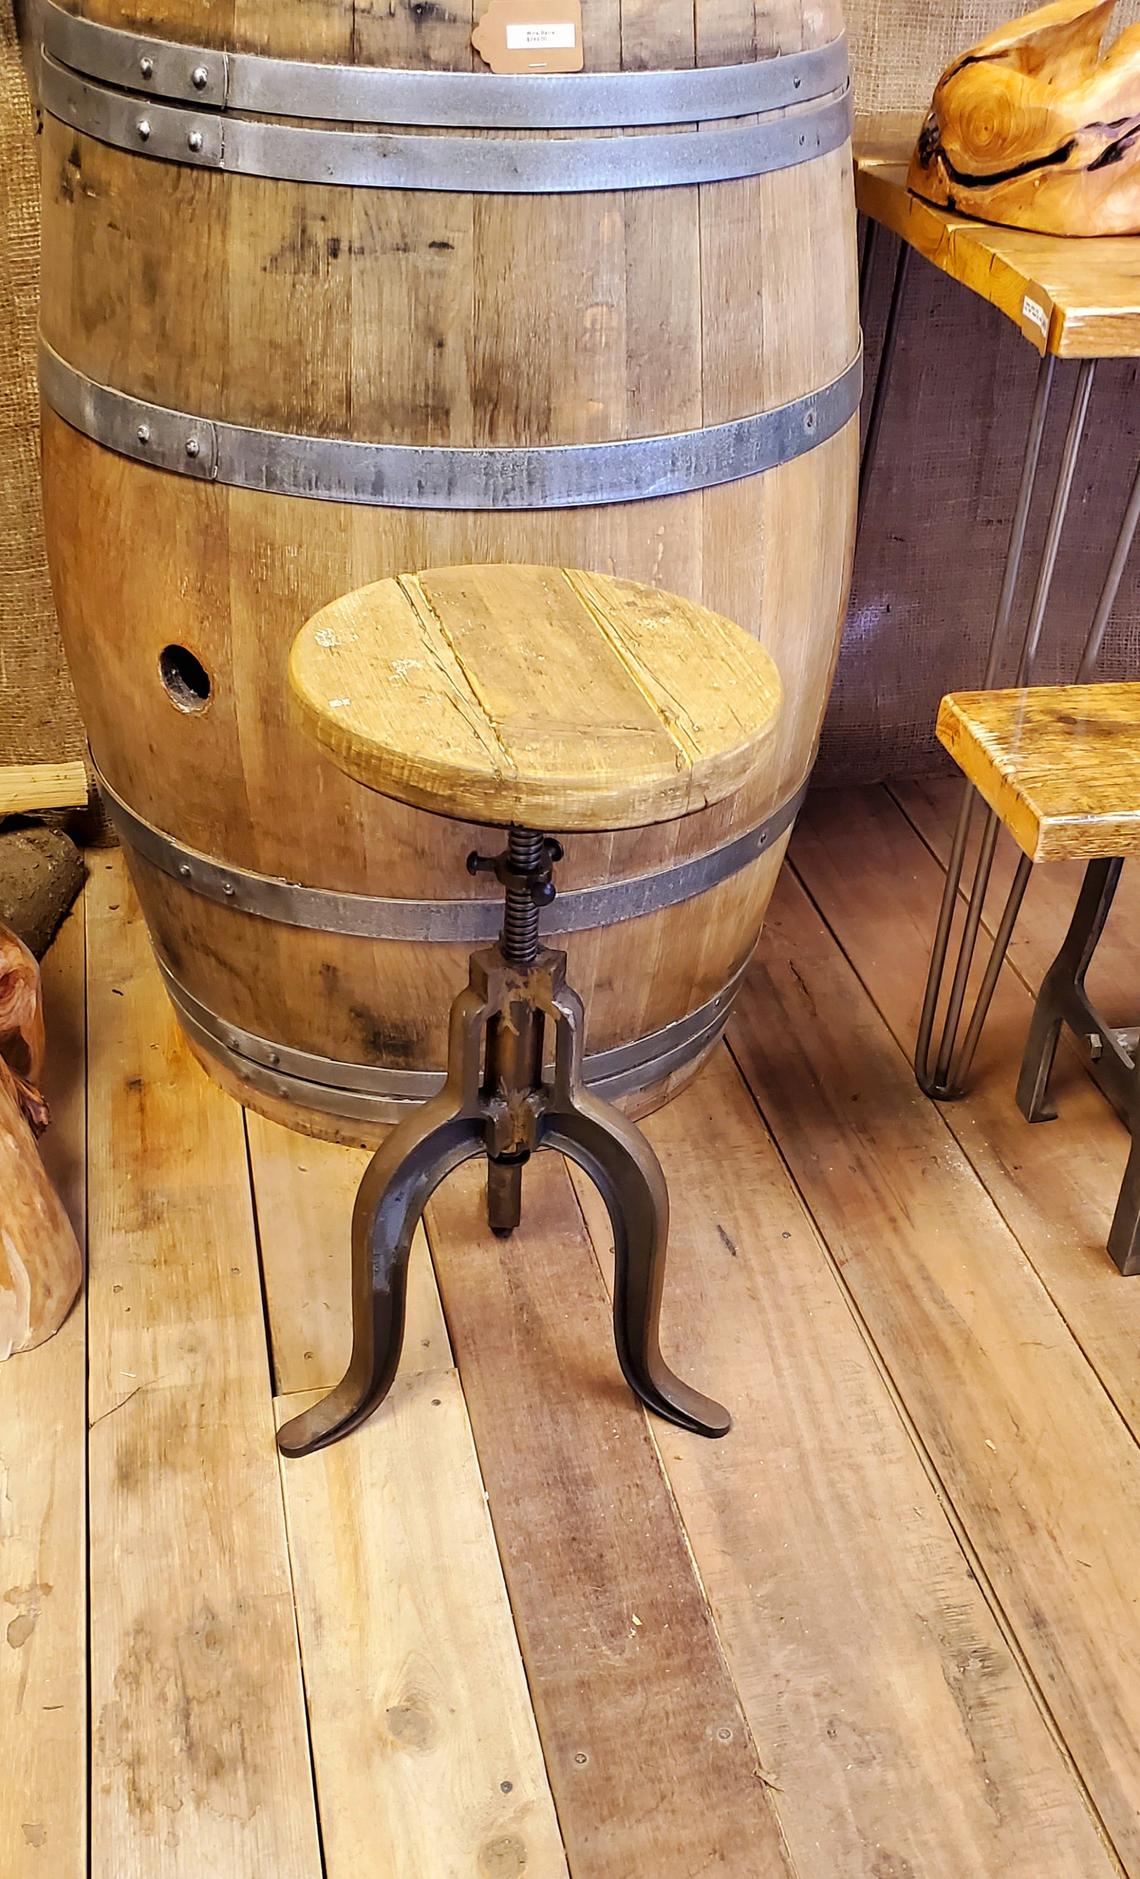 The 'Jameson' - Vintage Cast Iron Swivel Stool With Reclaimed Wood Top - Spearhead Collection - Stools - Seating